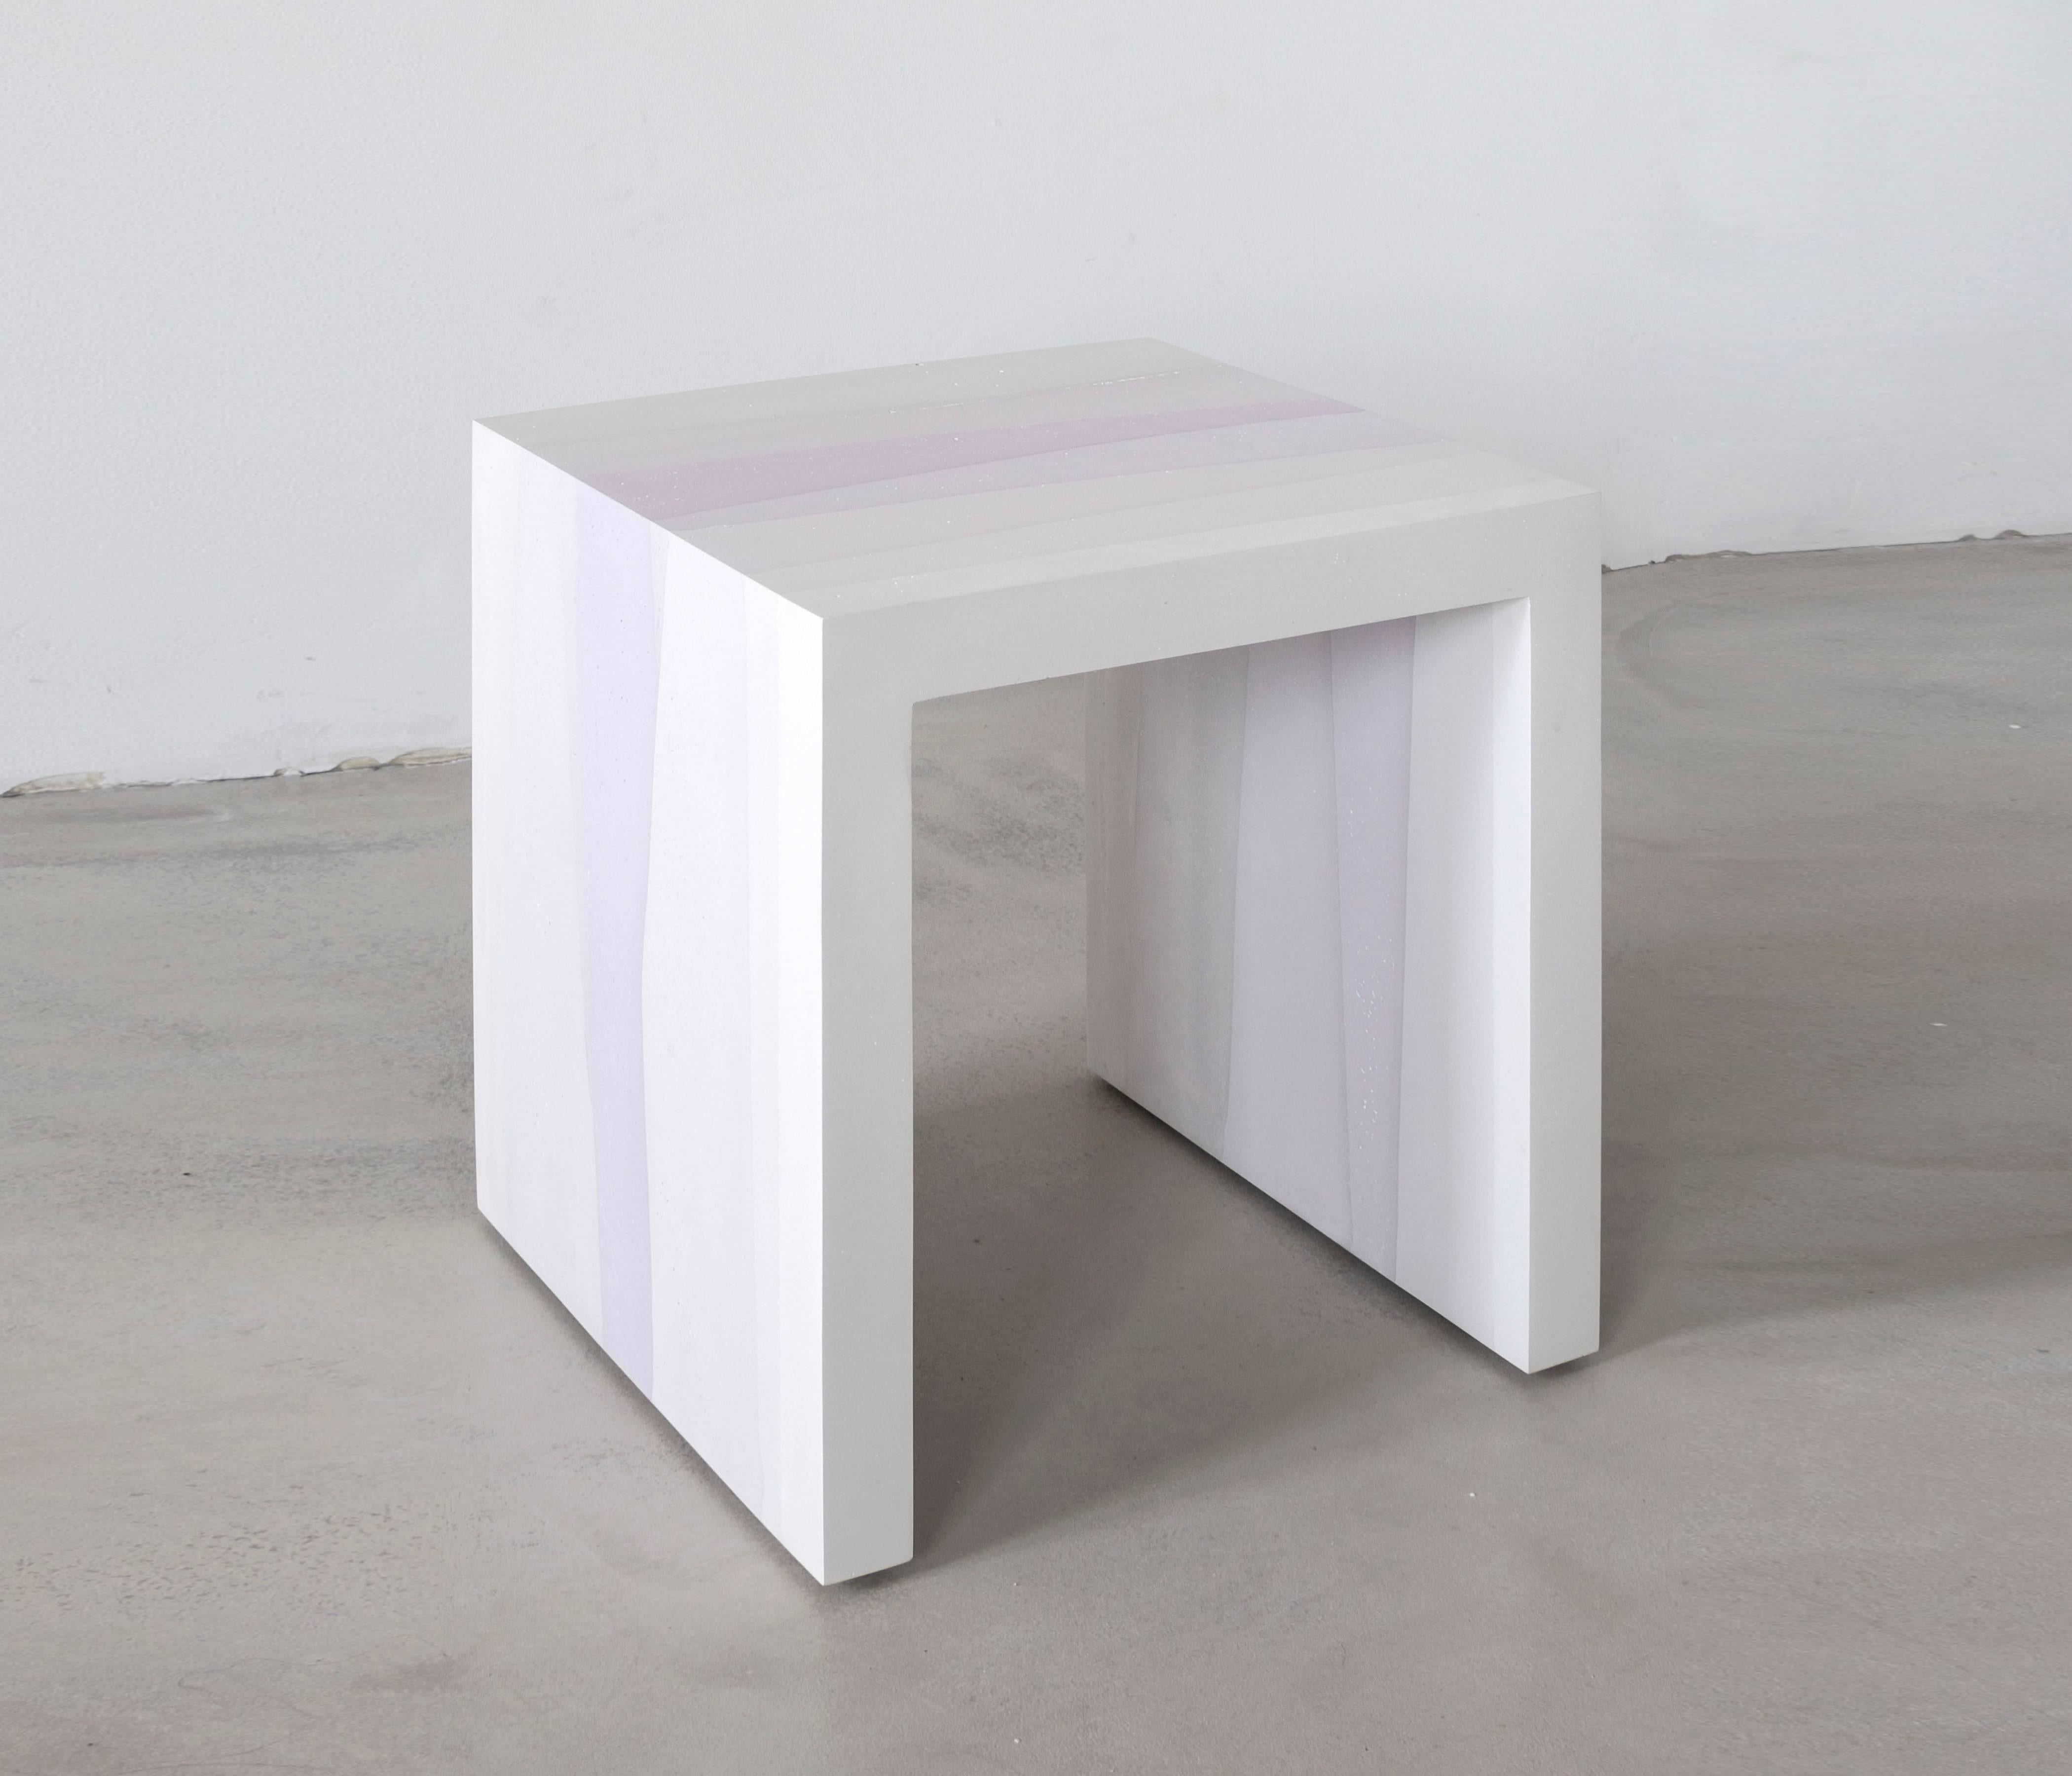 A contrast of softness and sharp angles, the made-to-order side table is cast entirely from hand-dyed cement. Poured in layers, the simple geometric form creates a light ombre effect reminiscent of watercolor. The piece weighs approximately 65lbs.